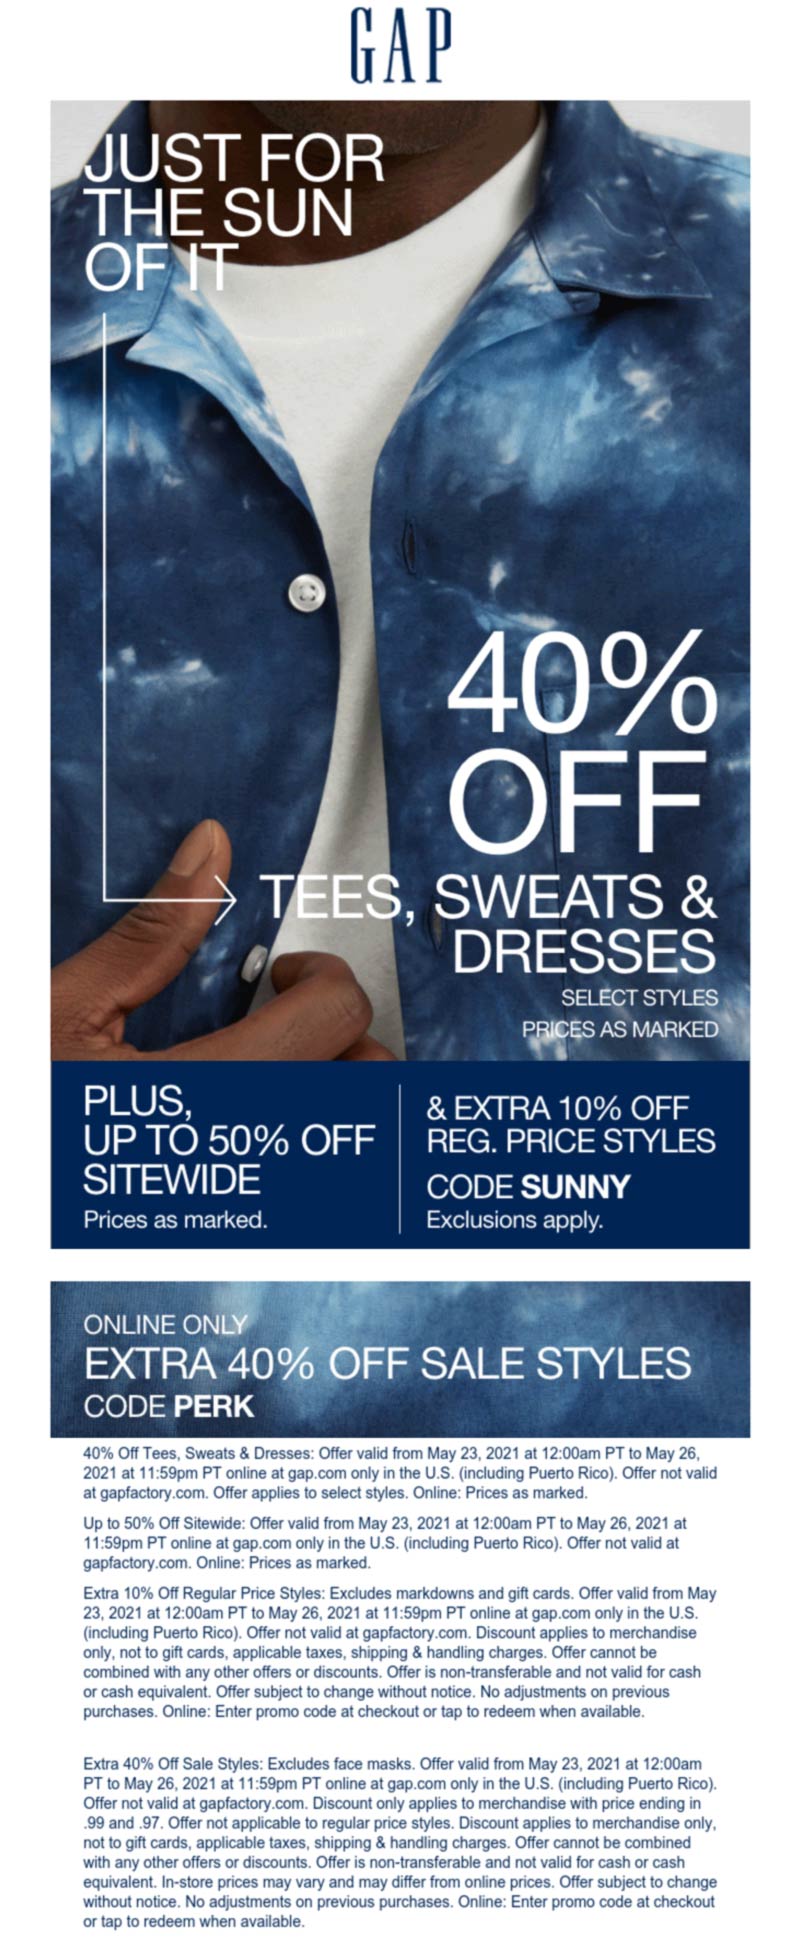 4060 off online at Gap via promo code SUNNY gap The Coupons App®